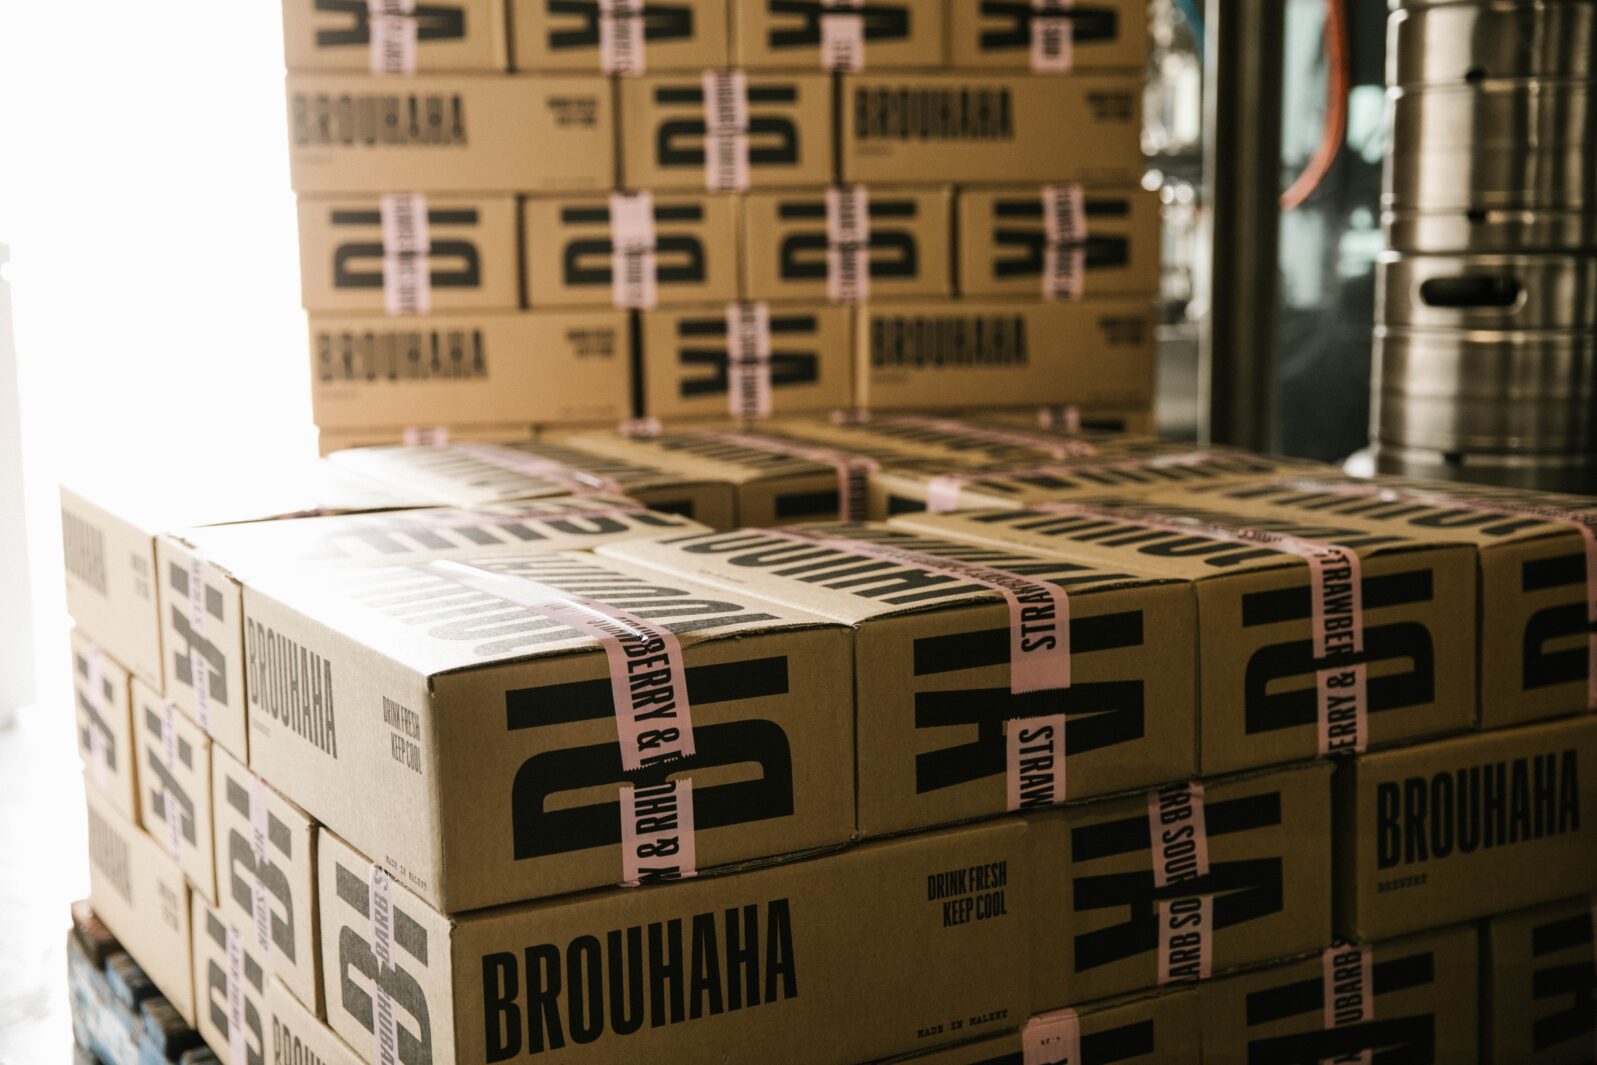 Cardboard boxes from Brouhaha brewery waiting to be shipped